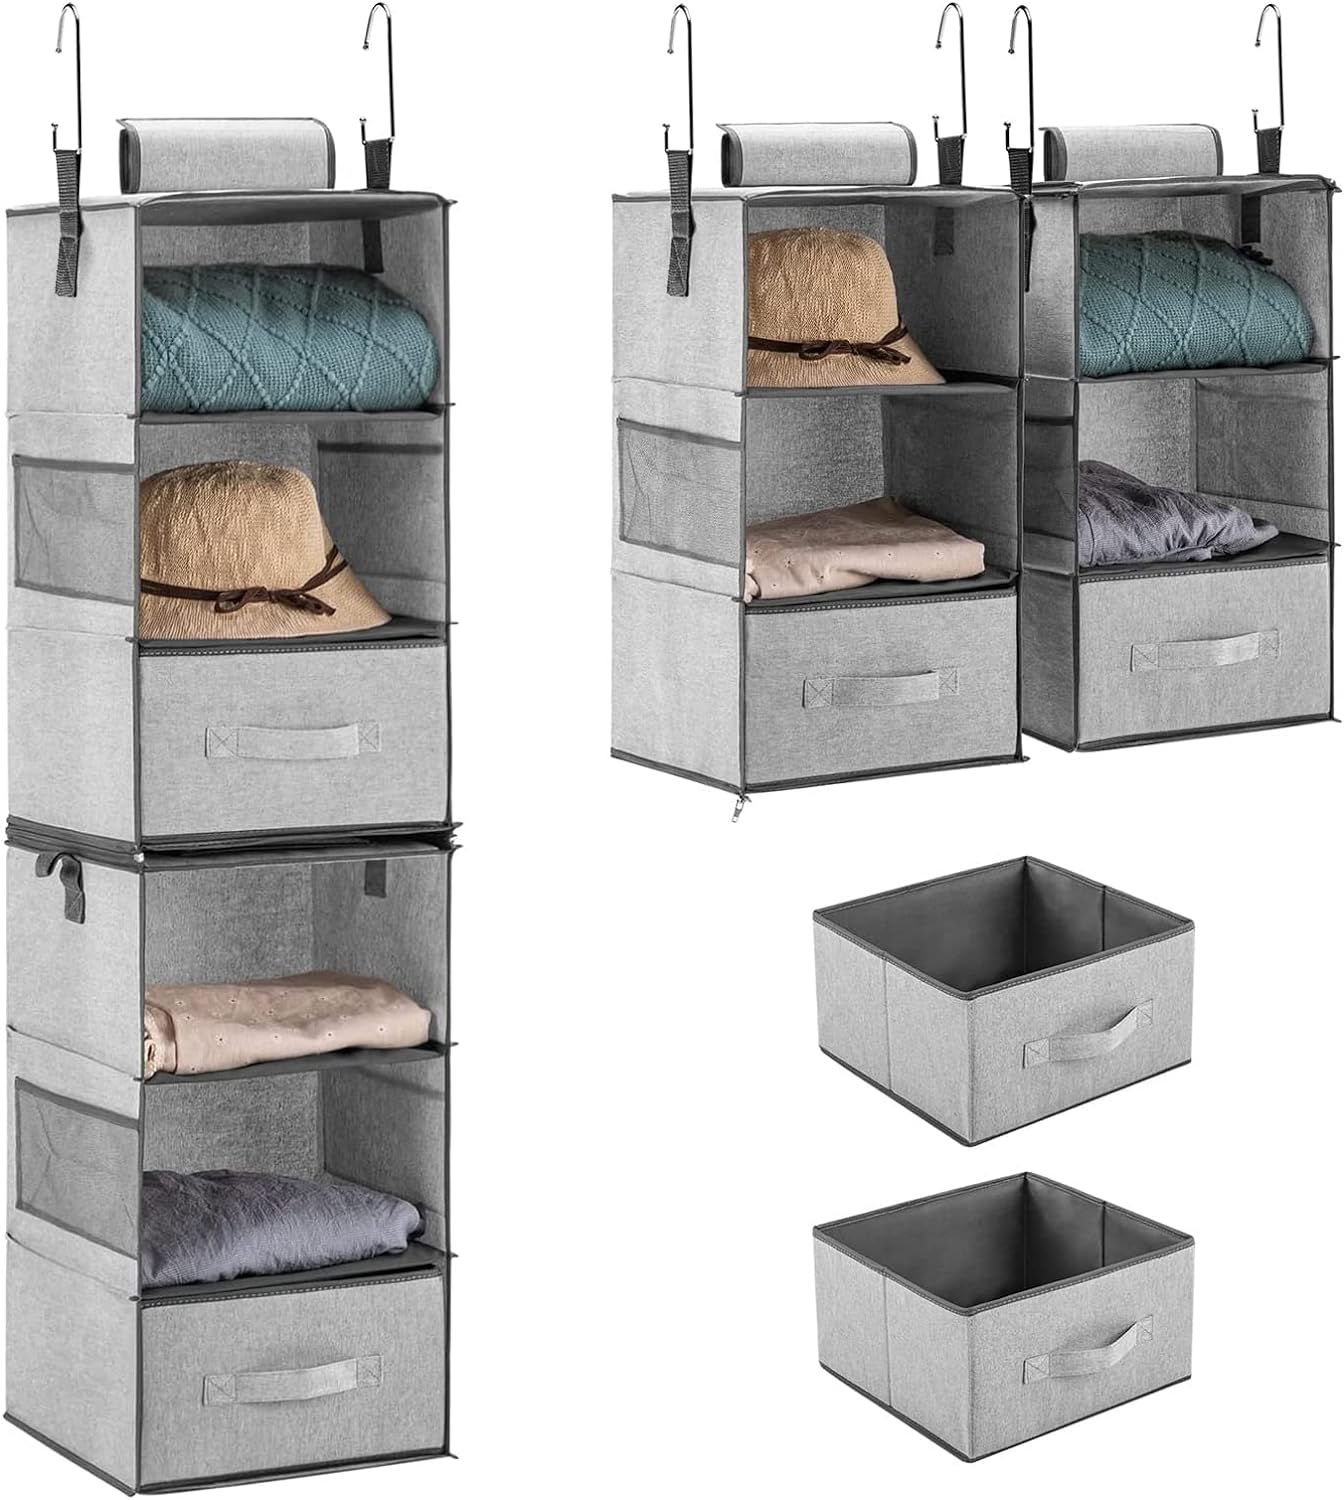 YOUDENOVA Hanging Closet Organizers with Drawers, Two 3-Shelf Separable Closet Hanging Shelves for Dorm, RV, Canvas, Grey